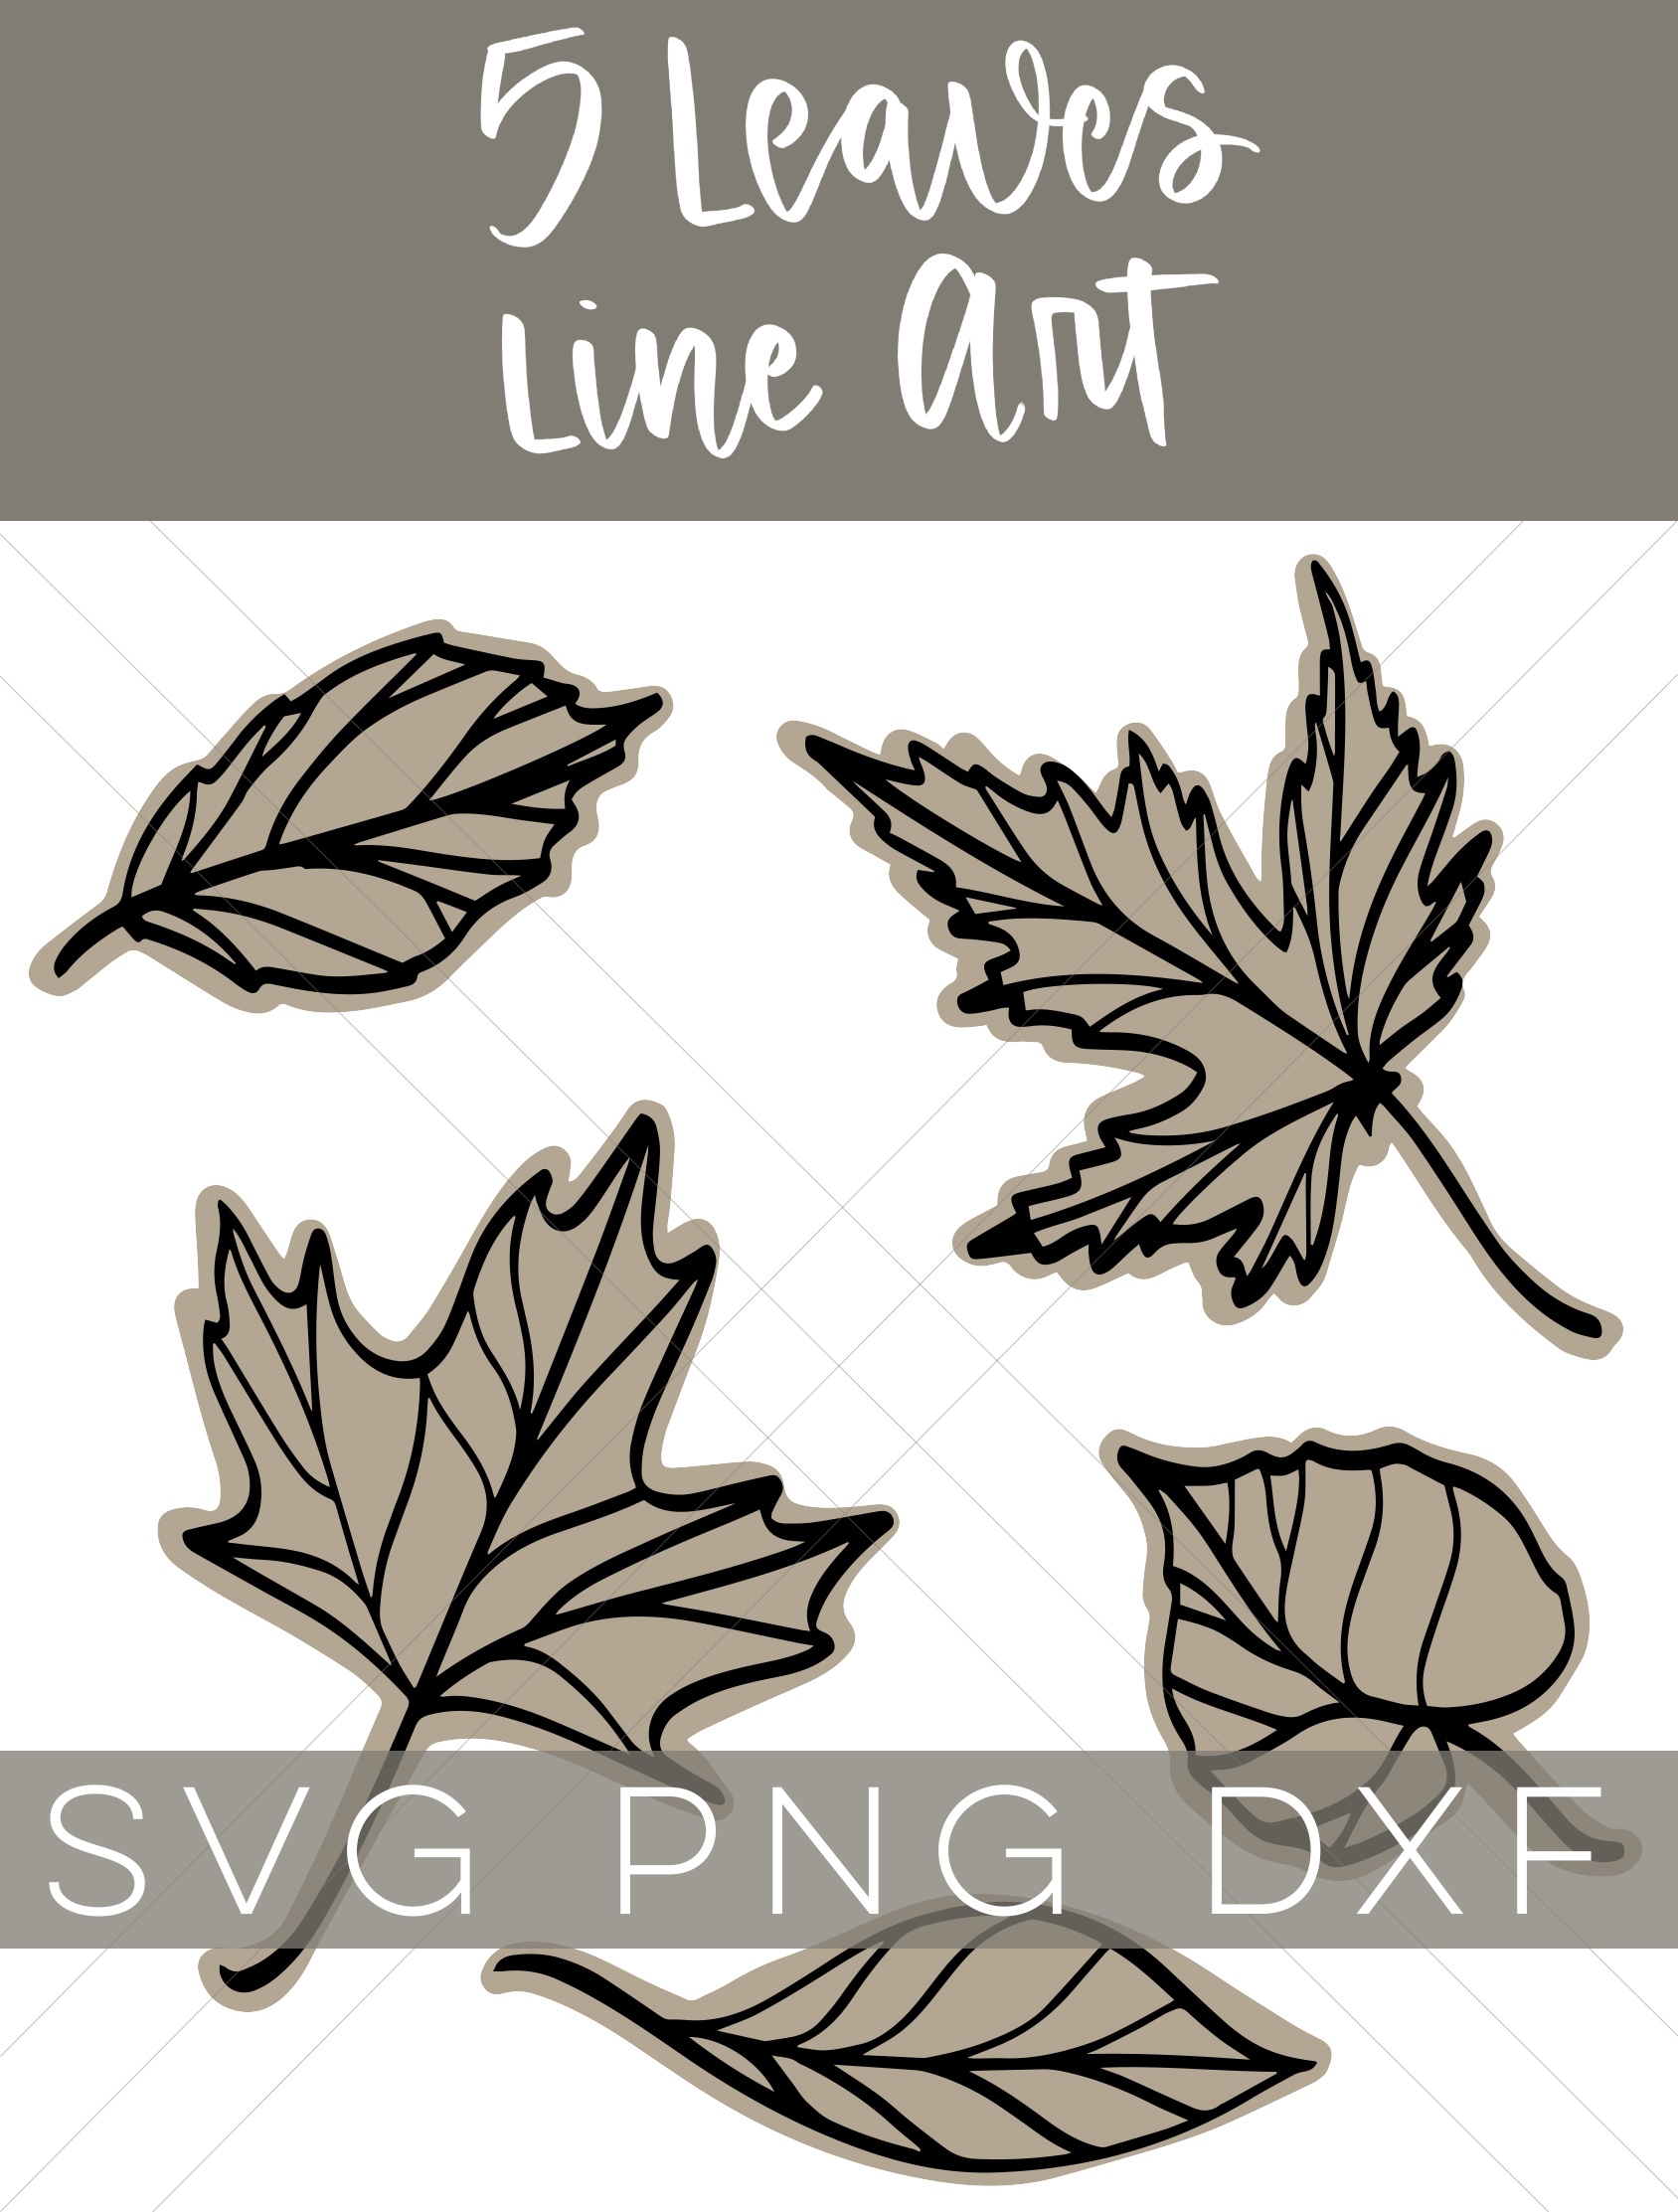 Collage of 5 line art leaves with text overlay - 5 Leaves Line Art SVG PNG DXF